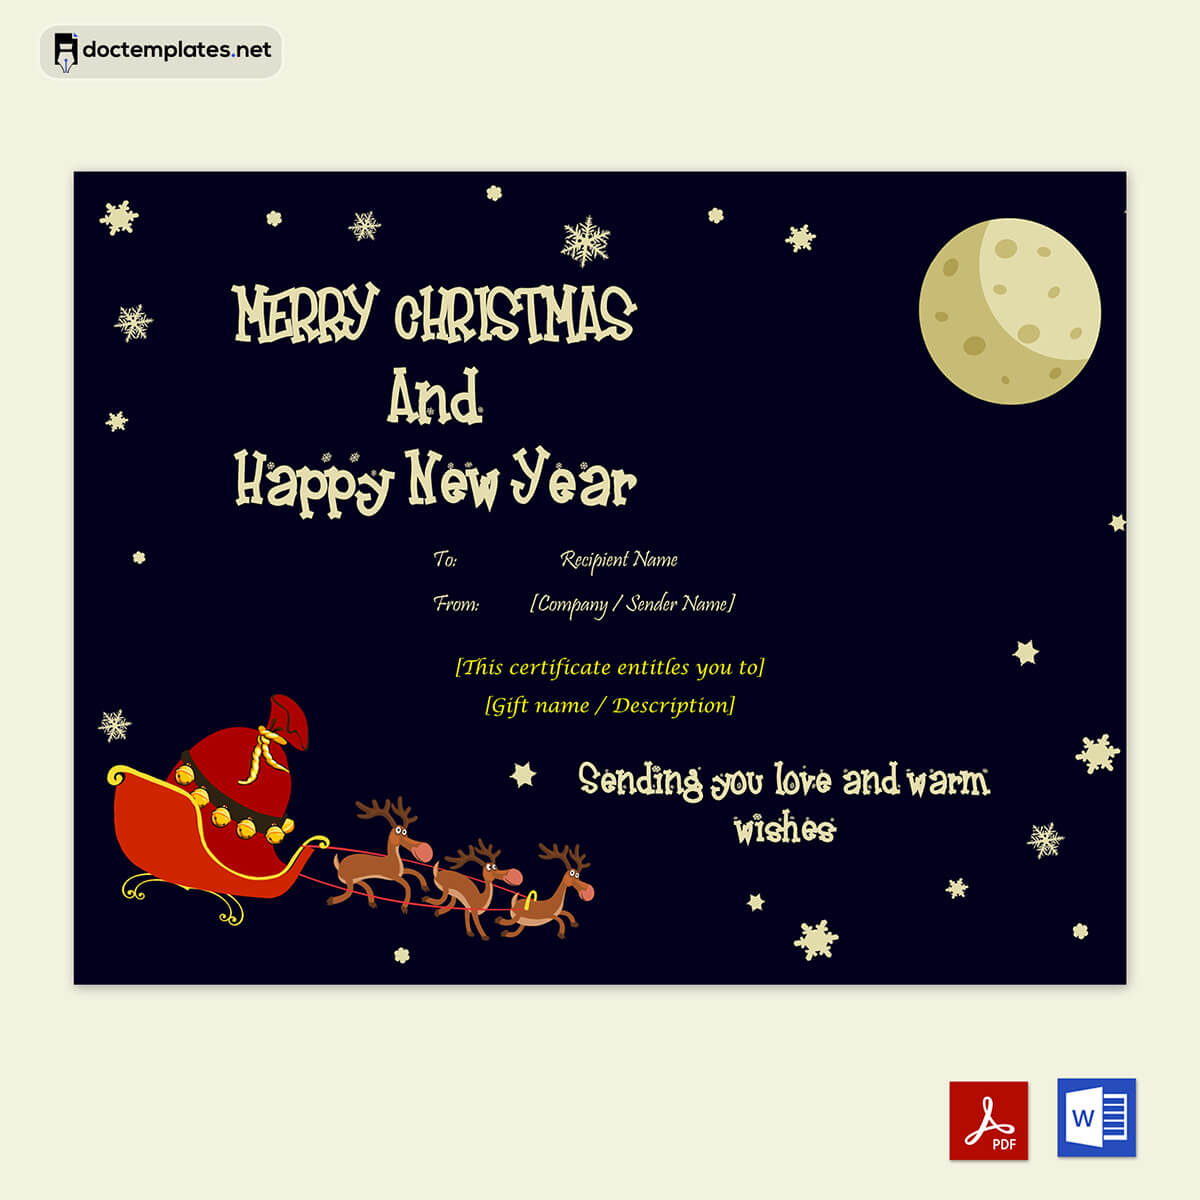 
christmas gift certificate template free download microsoft word
01